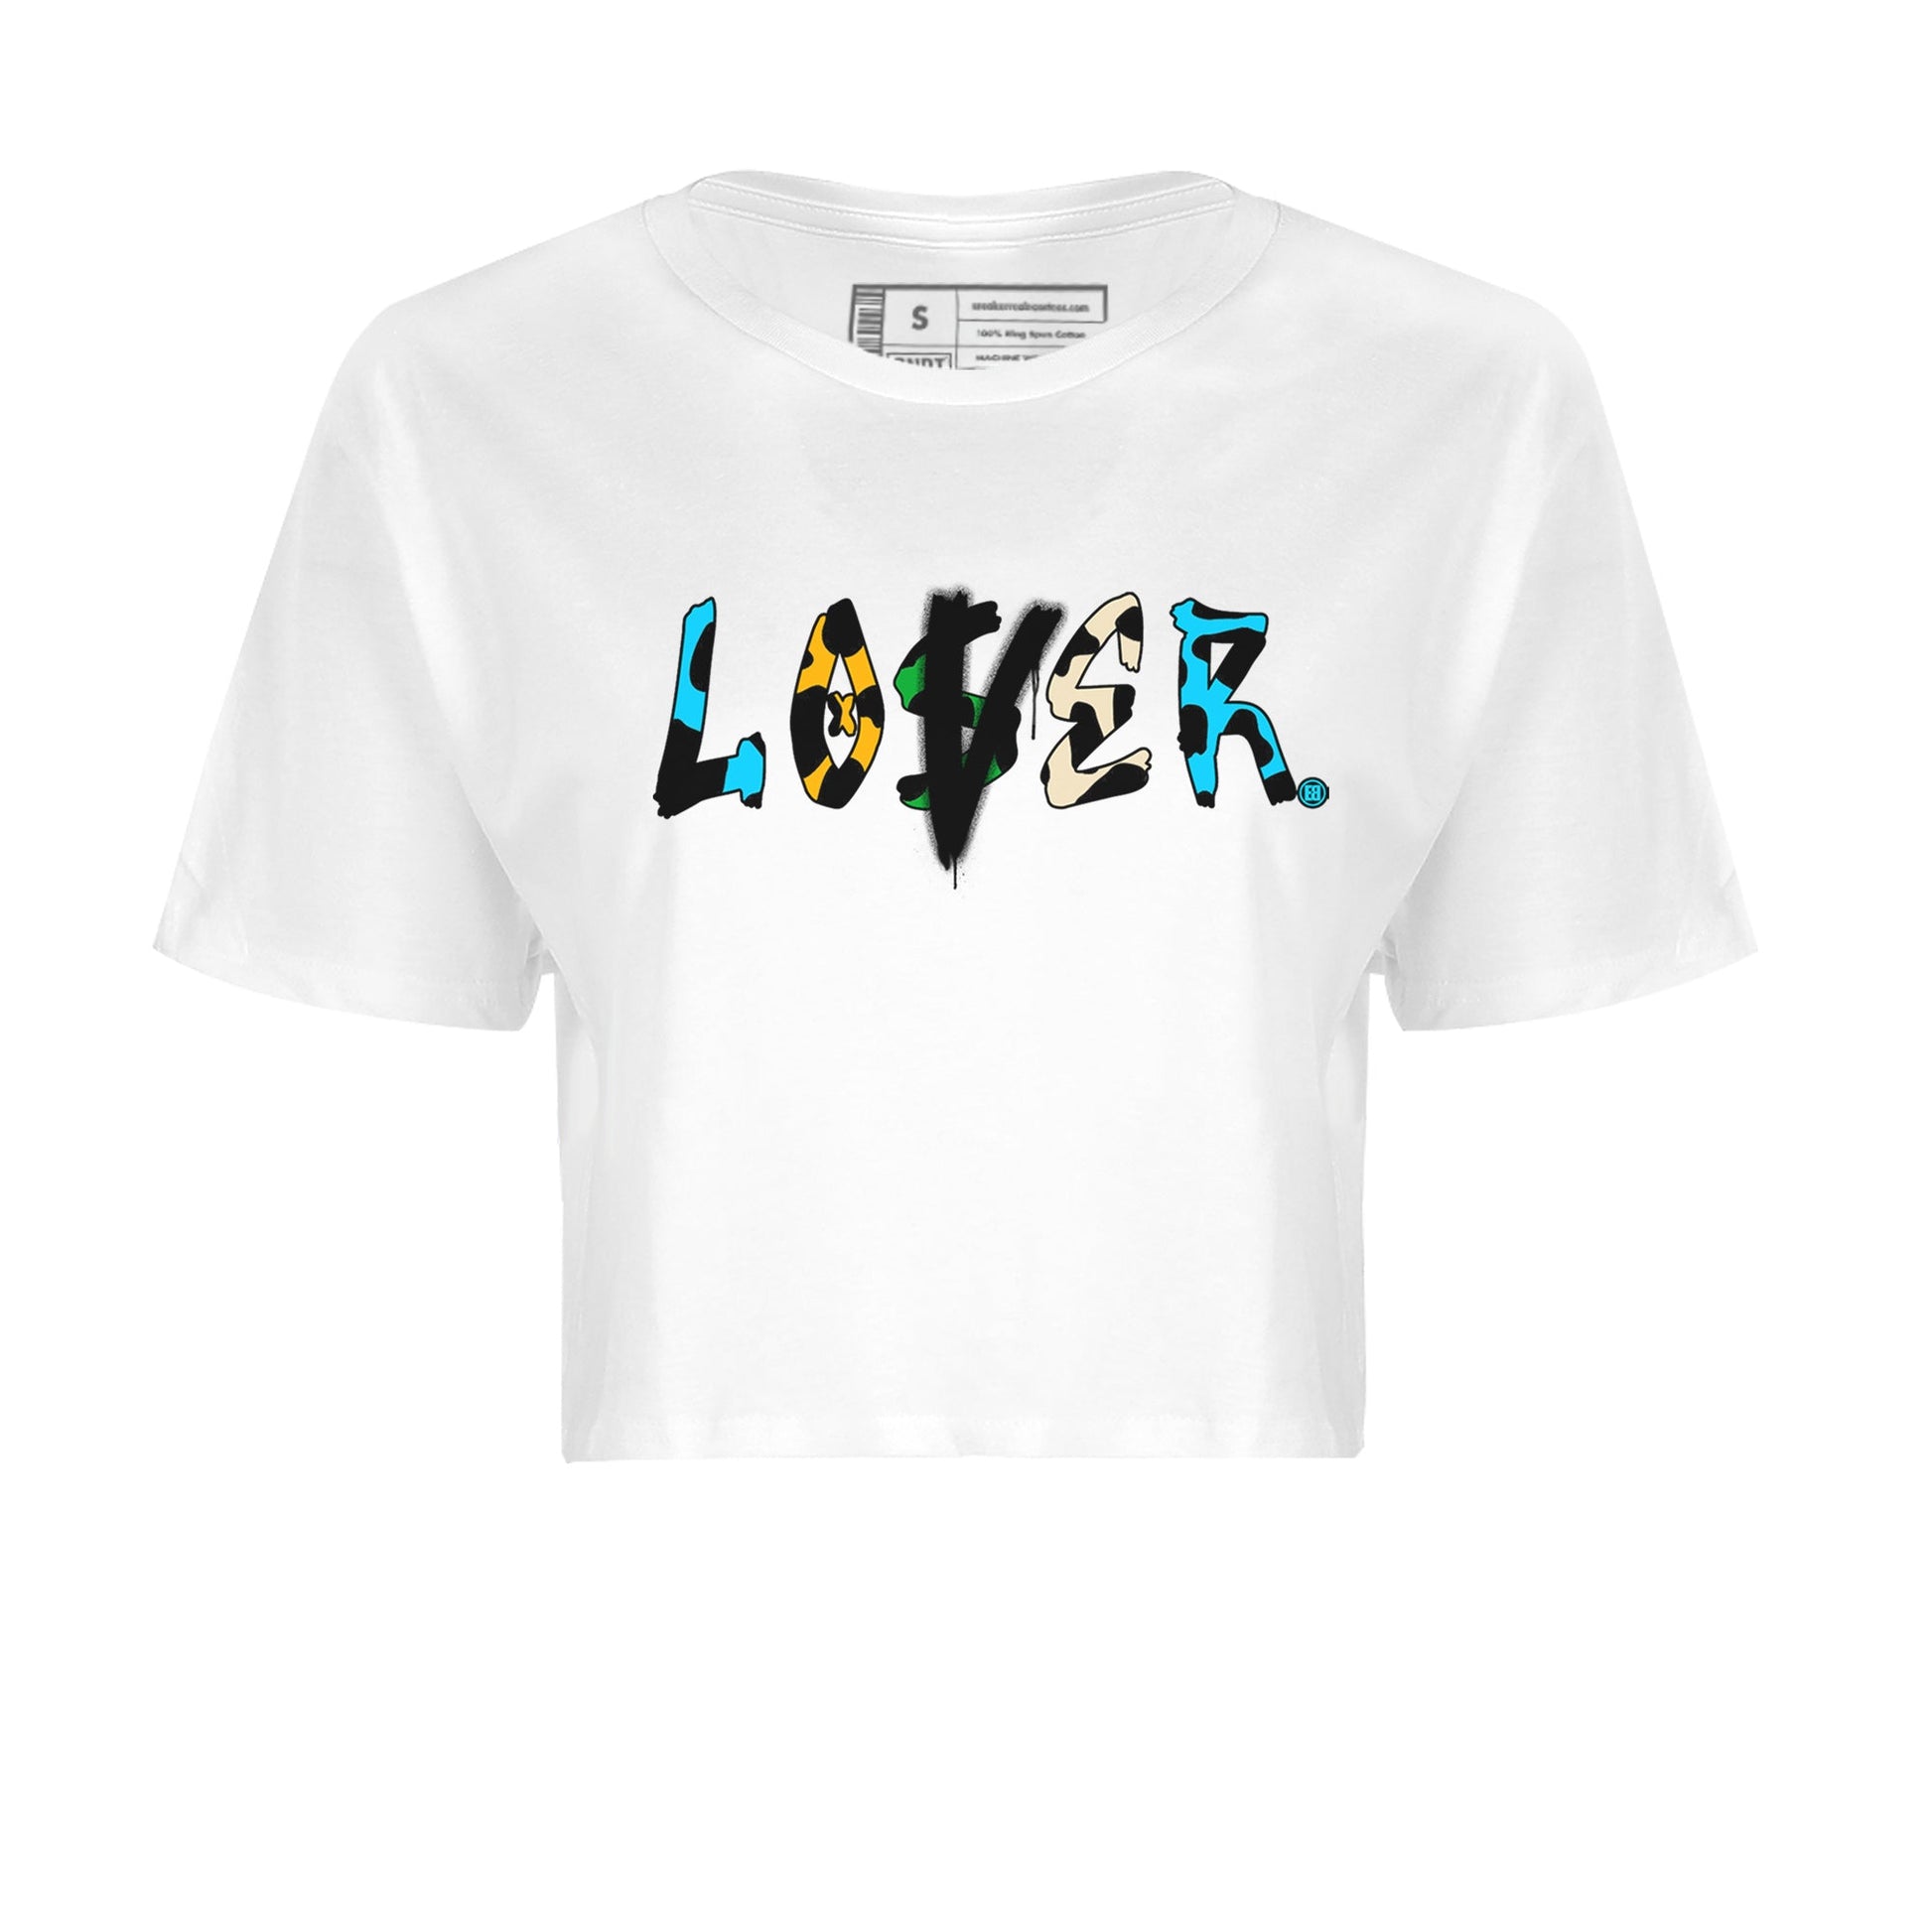 Dunk Chunky Dunky Tee Loser Lover Sneaker Tees Dunk Chunky Dunky Sneaker Release Tees Women's Shirts White 2